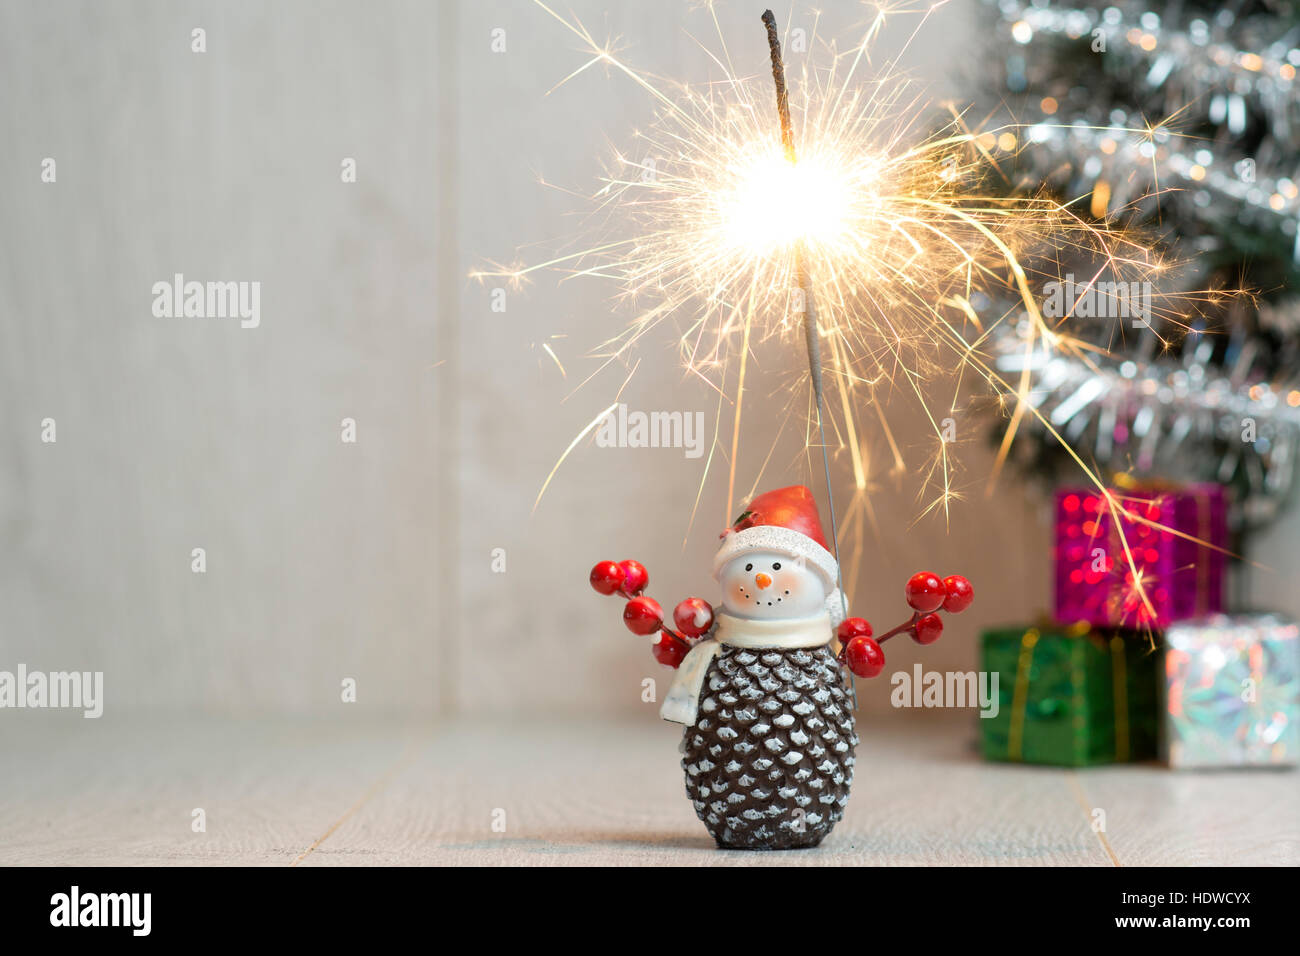 Christmas. Sparklers. Snowman. Gifts Stock Photo